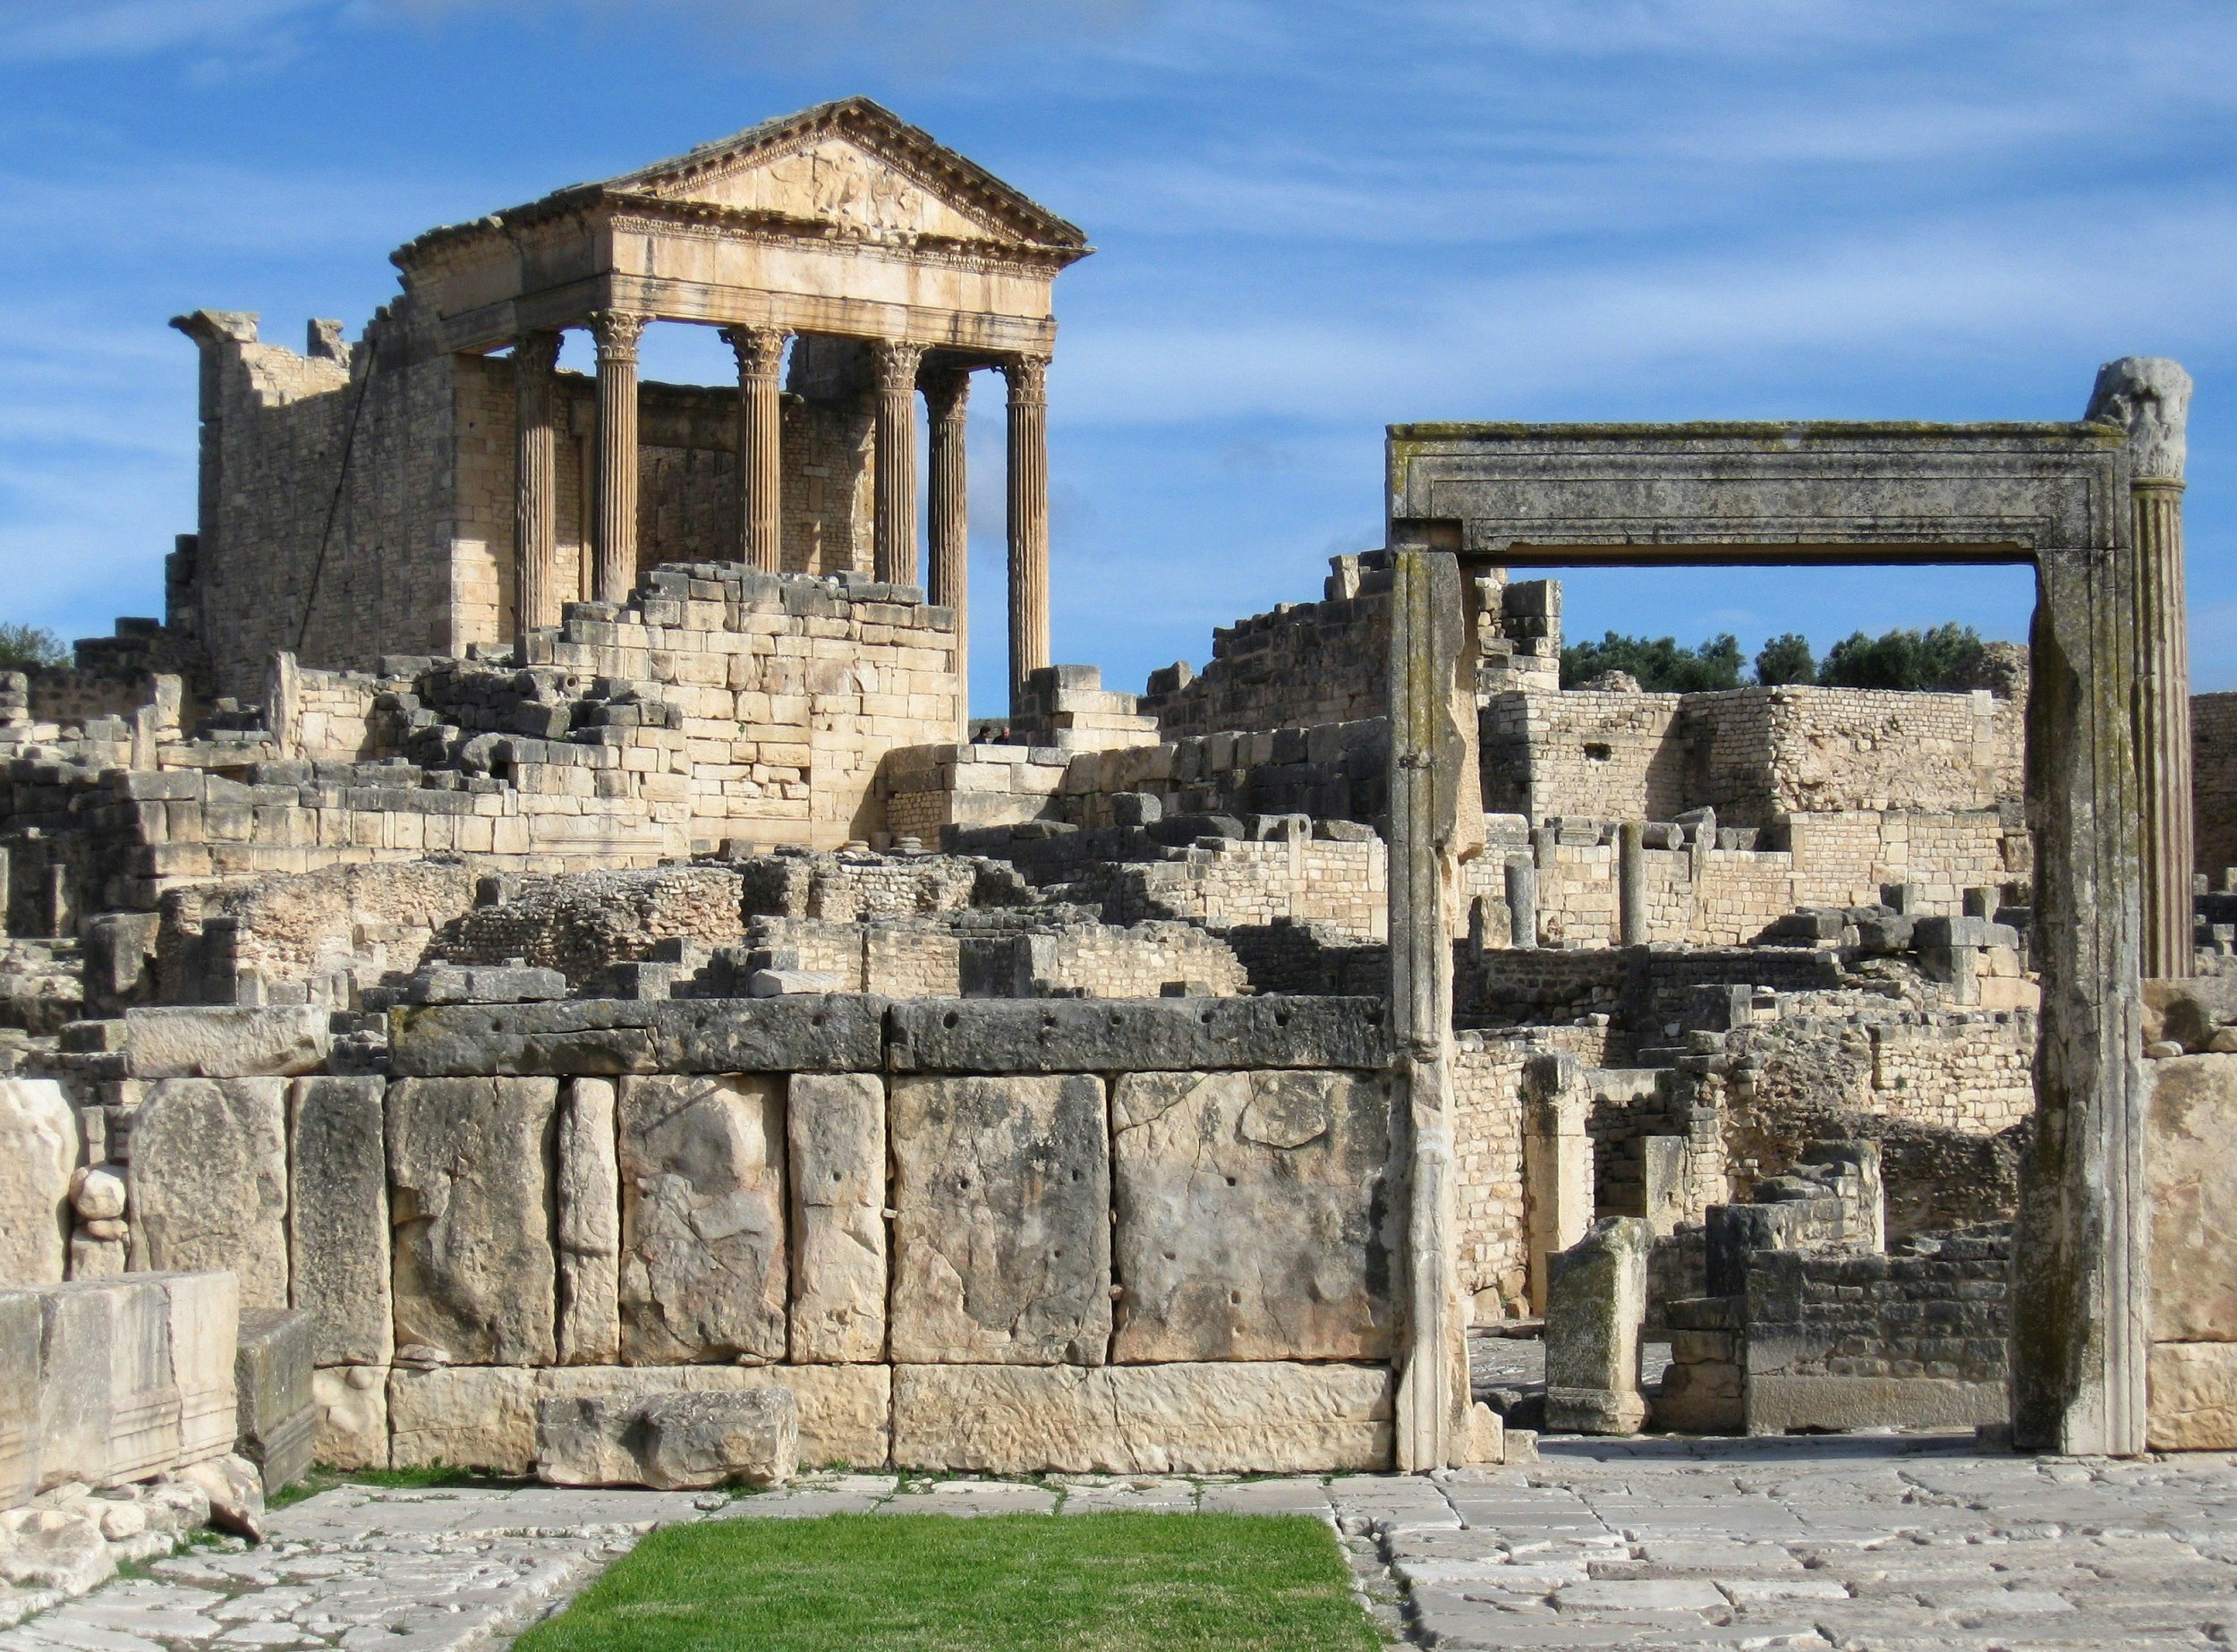 Looking very much like the Forum in Rome, this image is filled with stone ruins; rising into the blue sky at the back of the image is Roman temple with its front facade still held high by six large columns.